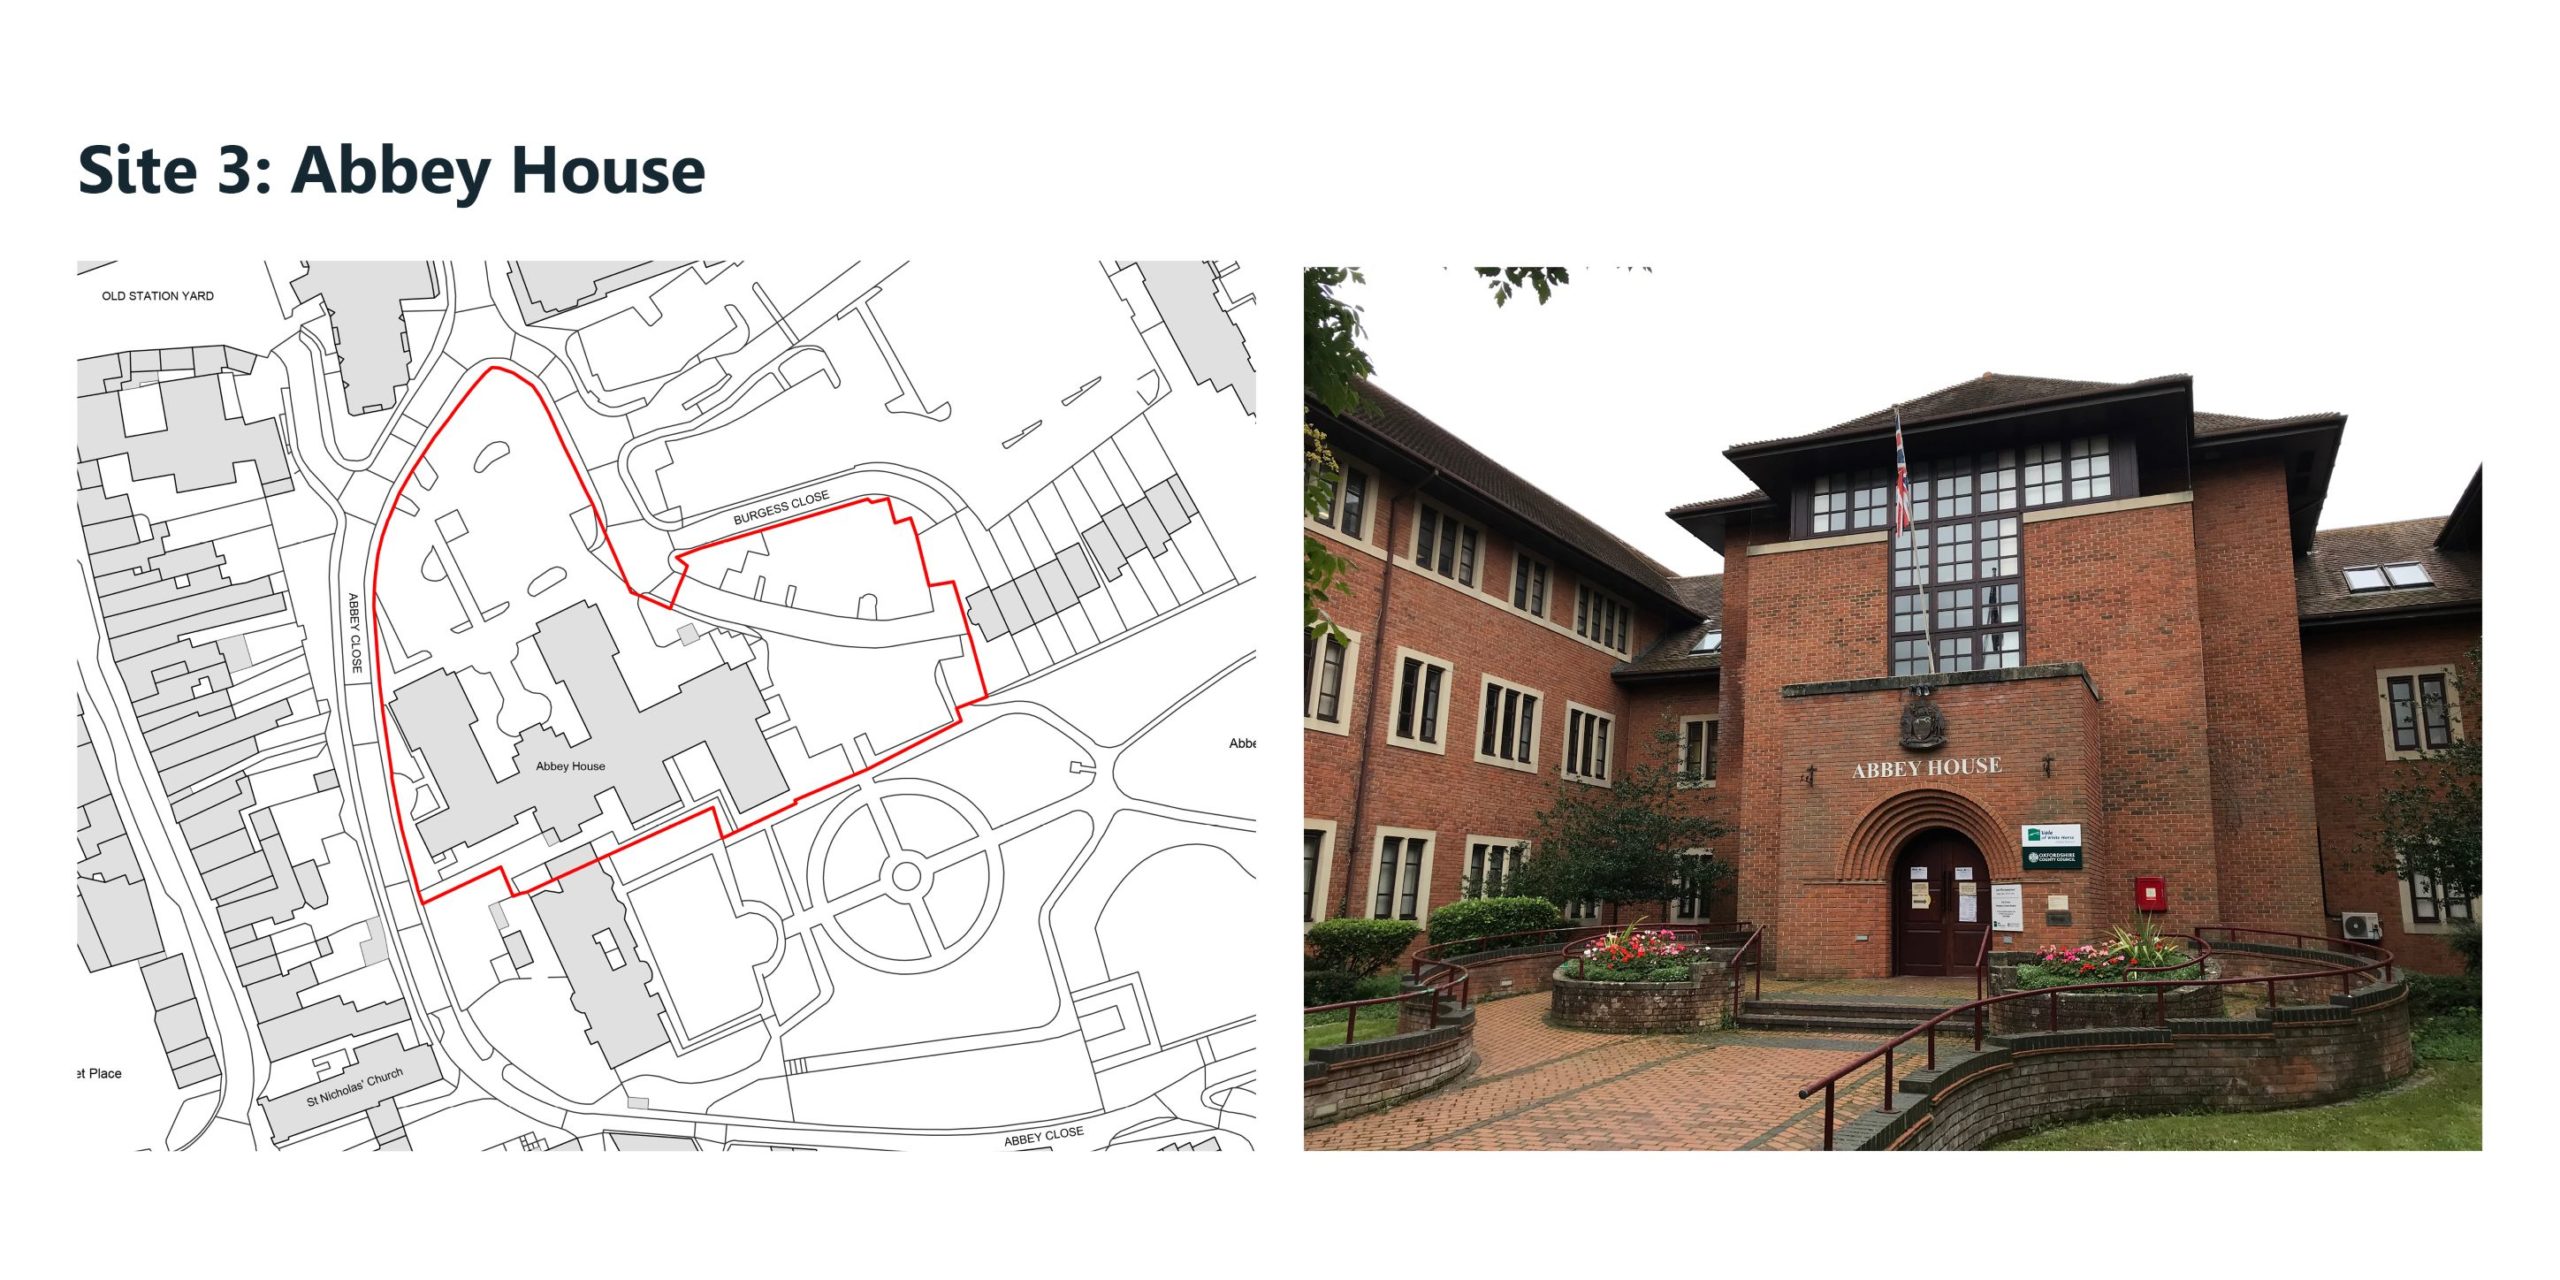 (left) Location plan of Abbey House. The site is bounded by Abbey Close to the west and Abbey Gardens to the south. The site boundary includes the Civic and Cattle Market carparks. (right) photograph of the entrance of Abbey House.